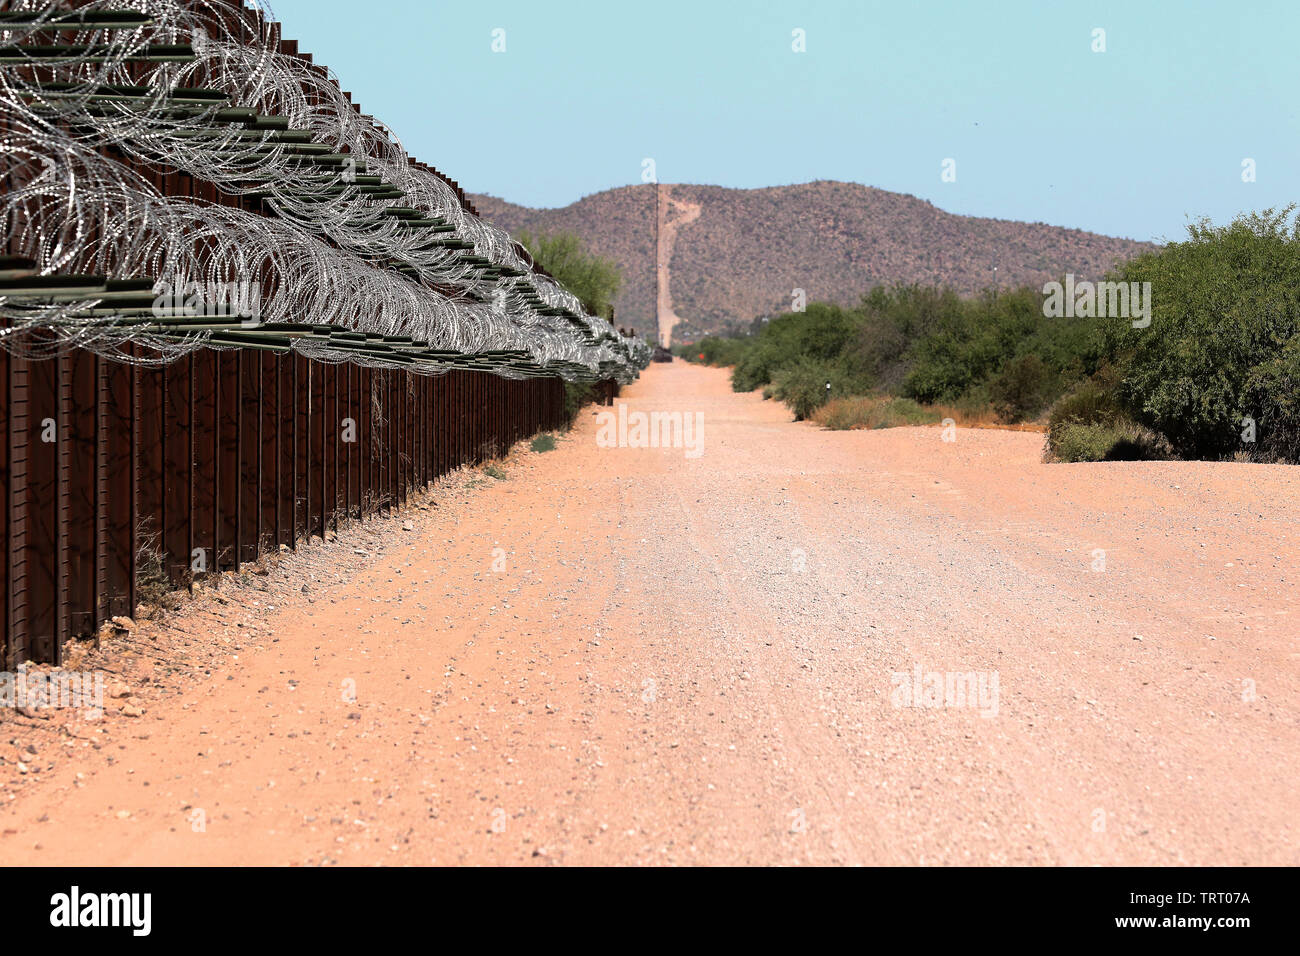 A quality assurance (QA) specialist with Task Force Barrier visited a portion of the Tucson Sector to do reconnaissance of the existing barrier June 8, 2019. The QA noted the presence of flash flood gates, access gates, harsh conditions, areas where the barrier had been cut and repaired, and steep grades, making some areas difficult to reach. Stock Photo